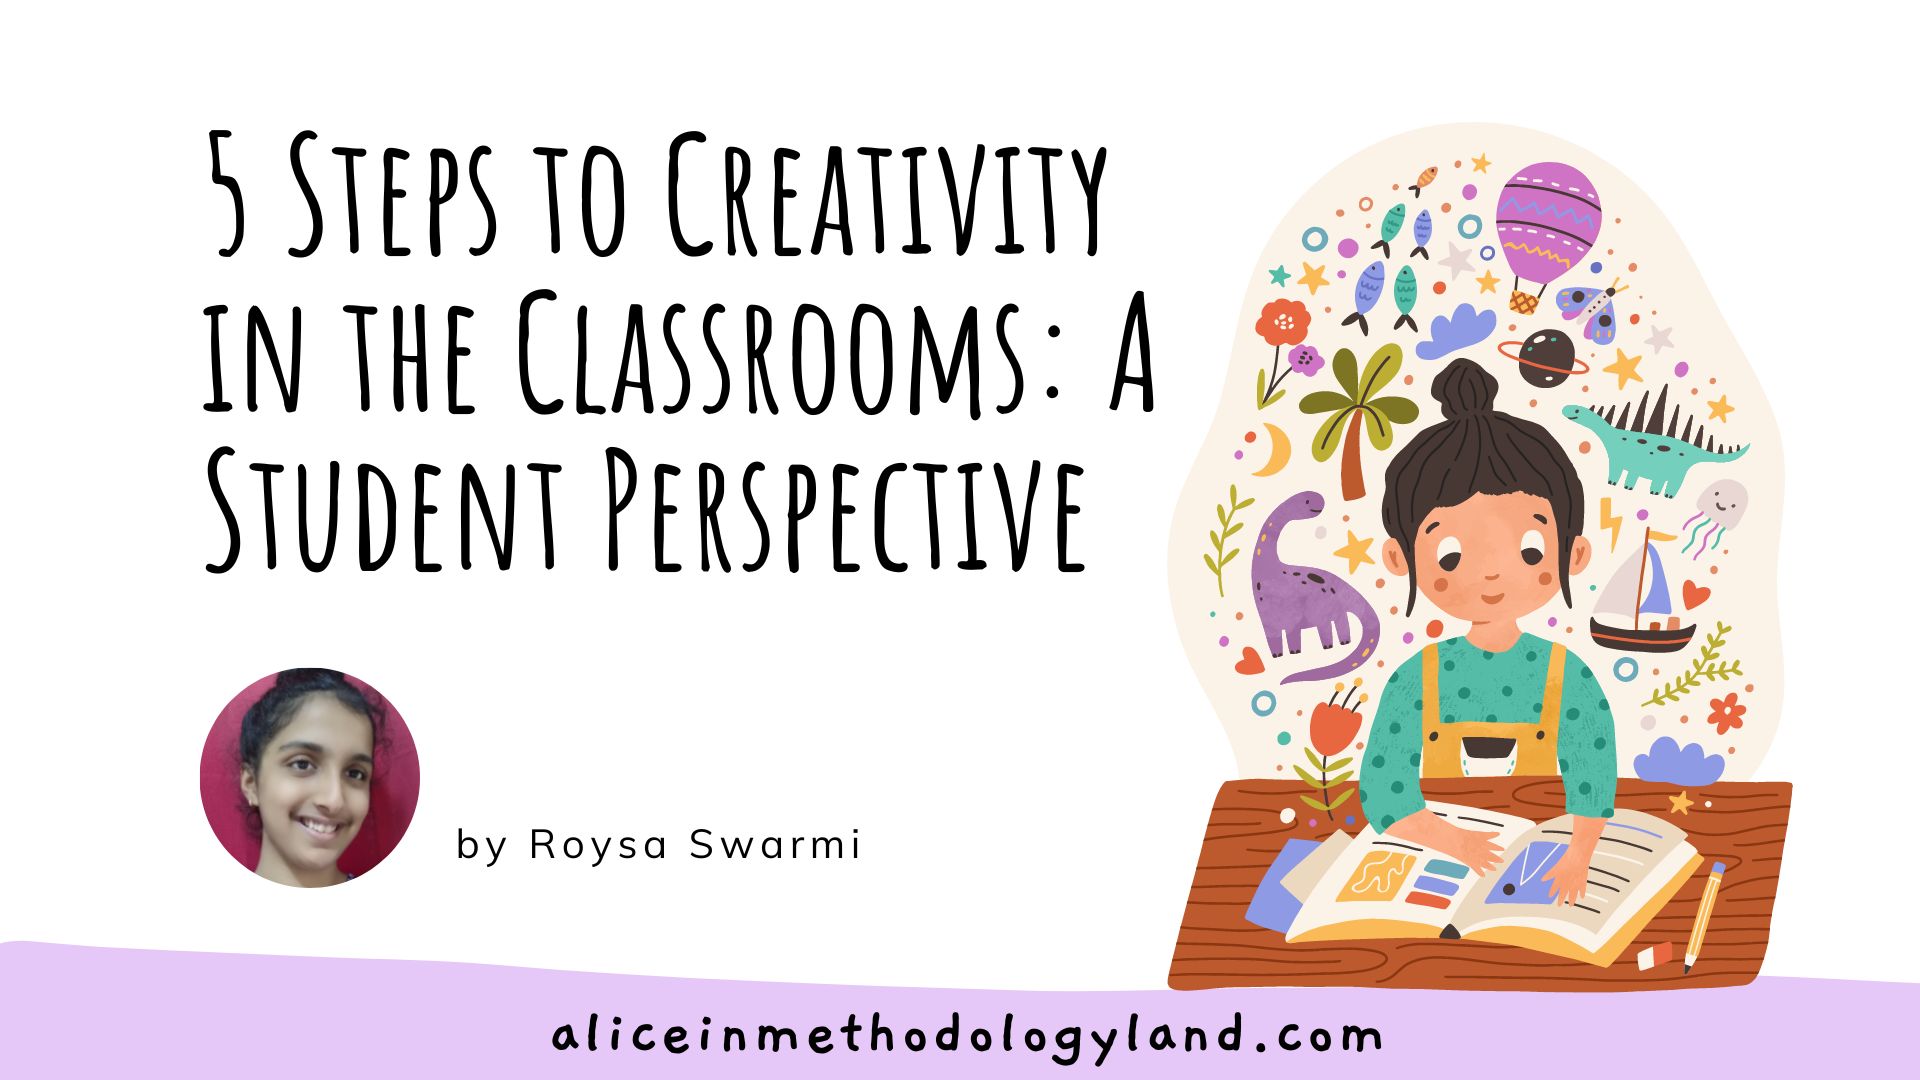 5 Steps to Creativity in the Classrooms: A Student Perspective